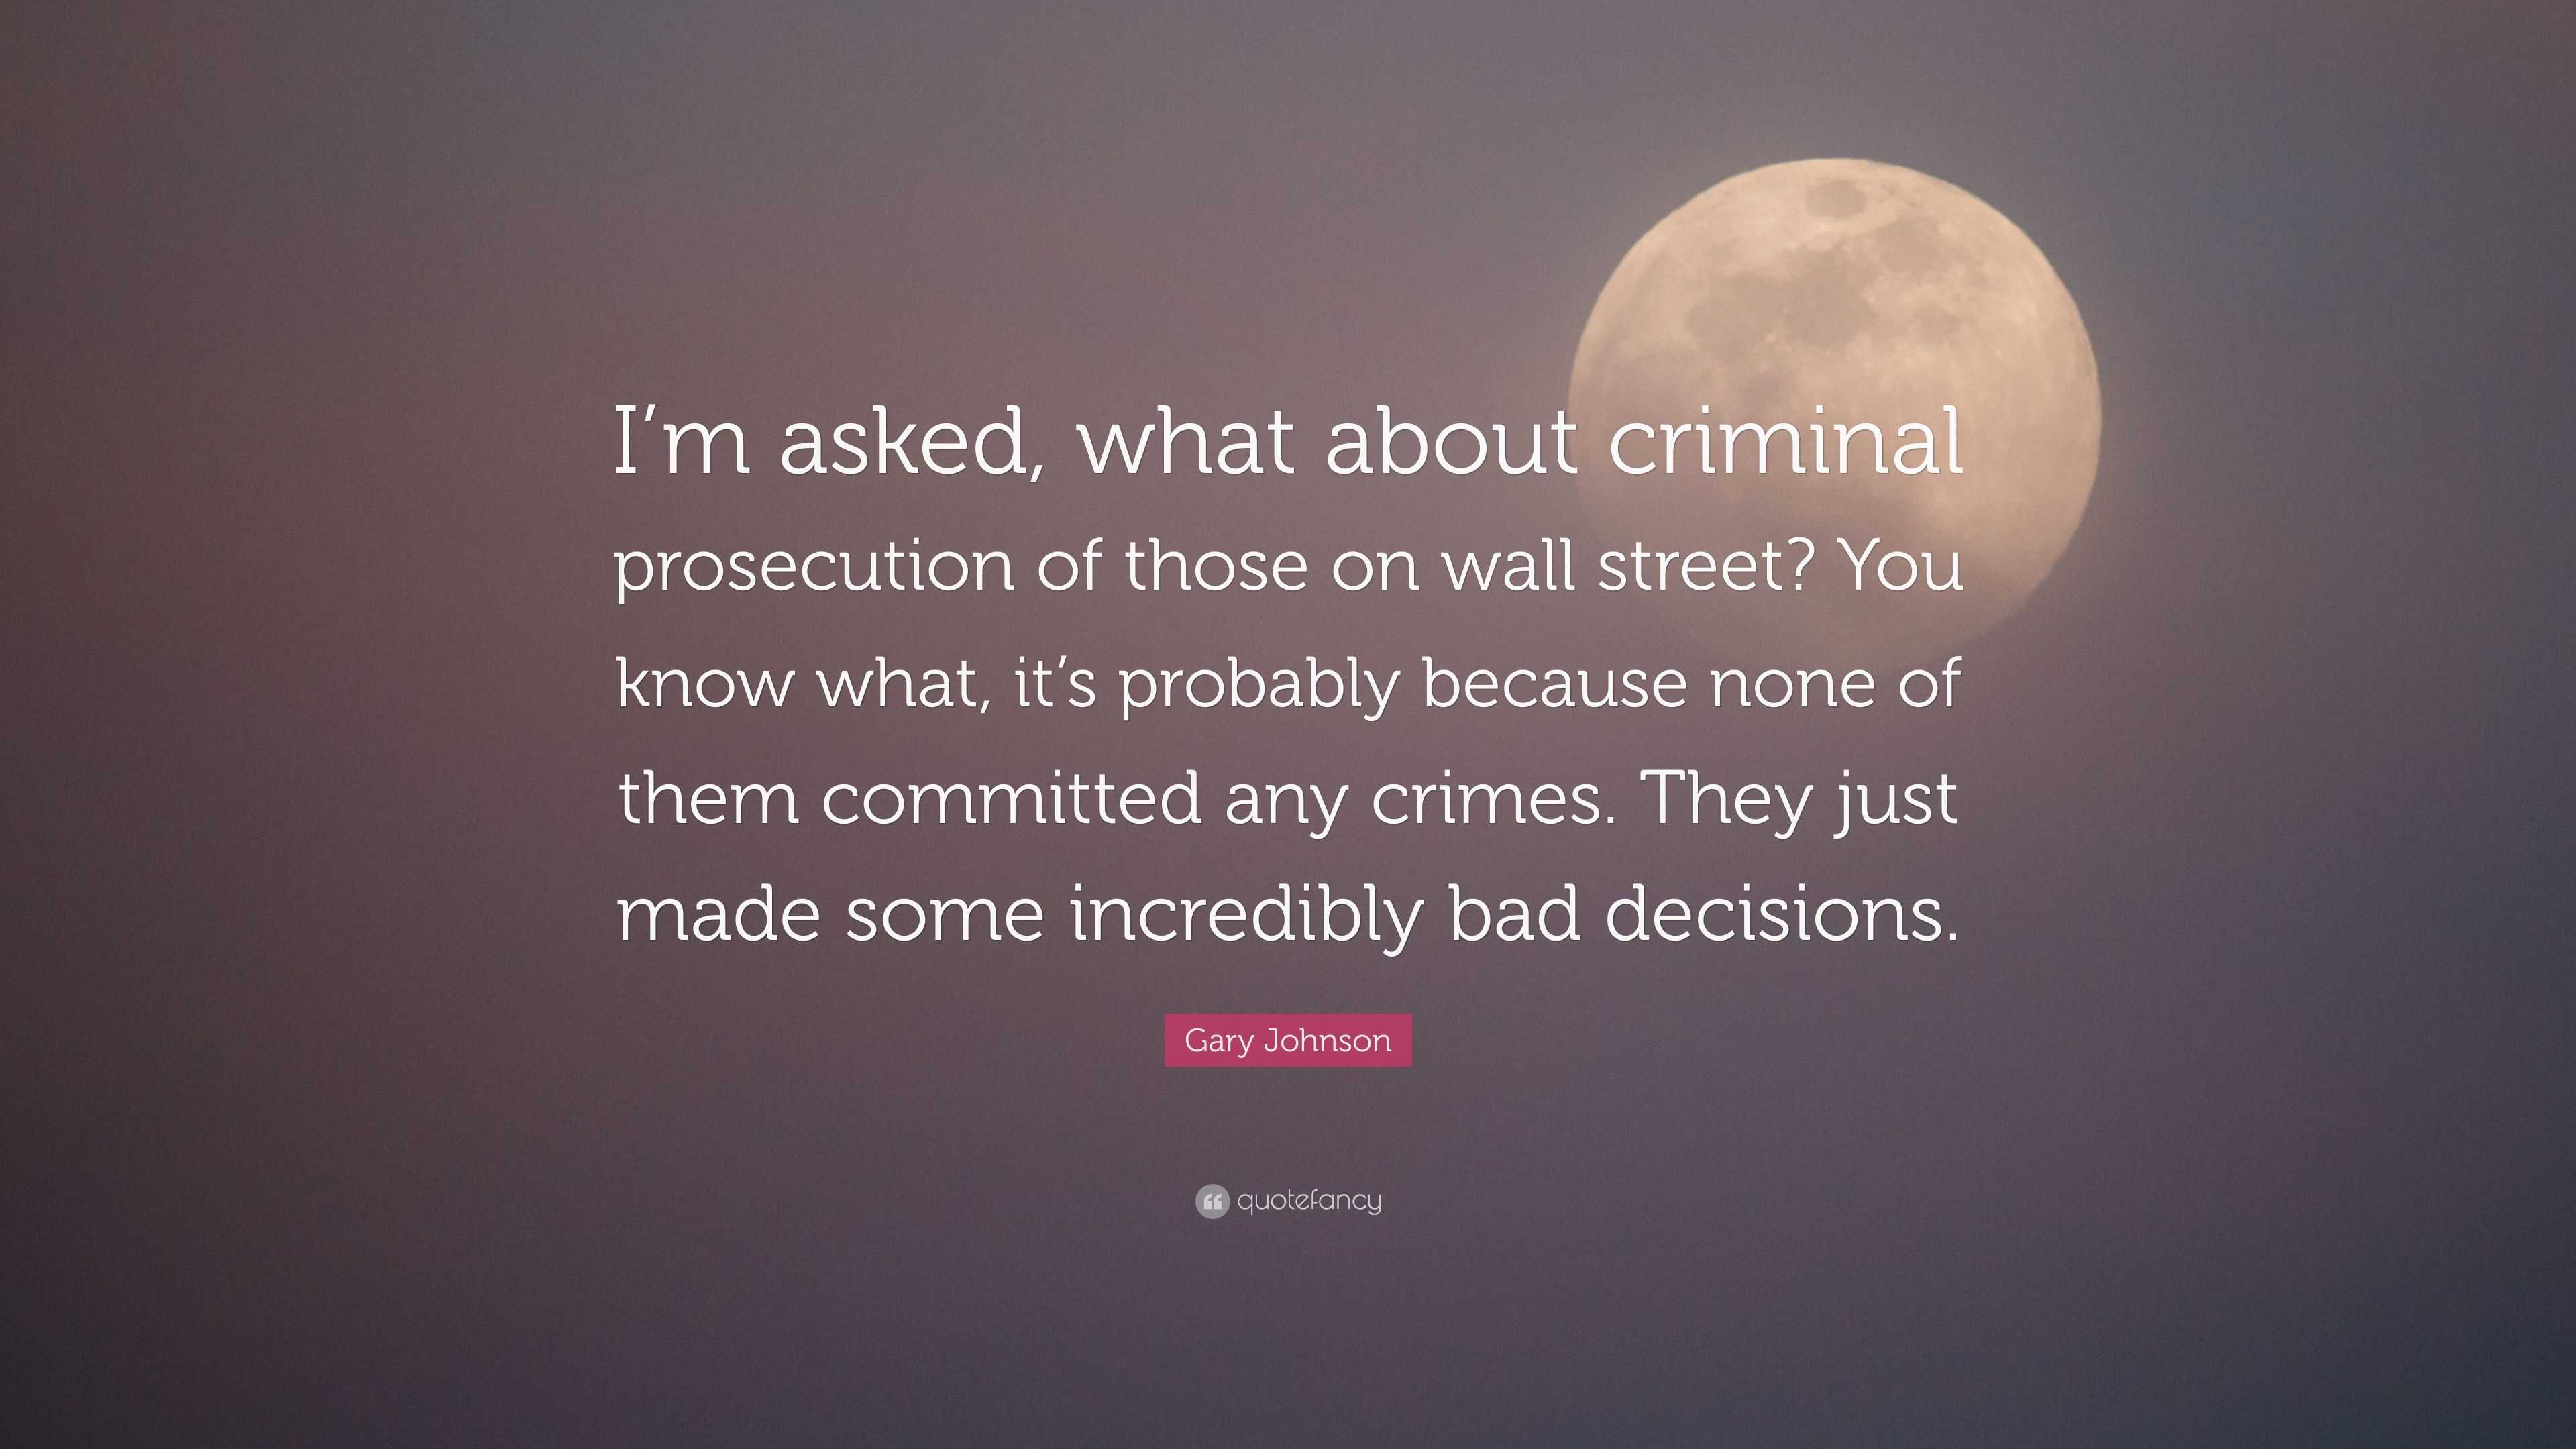 Gary Johnson Quote: "I'm asked, what about criminal prosecution of those on wall street? You ...